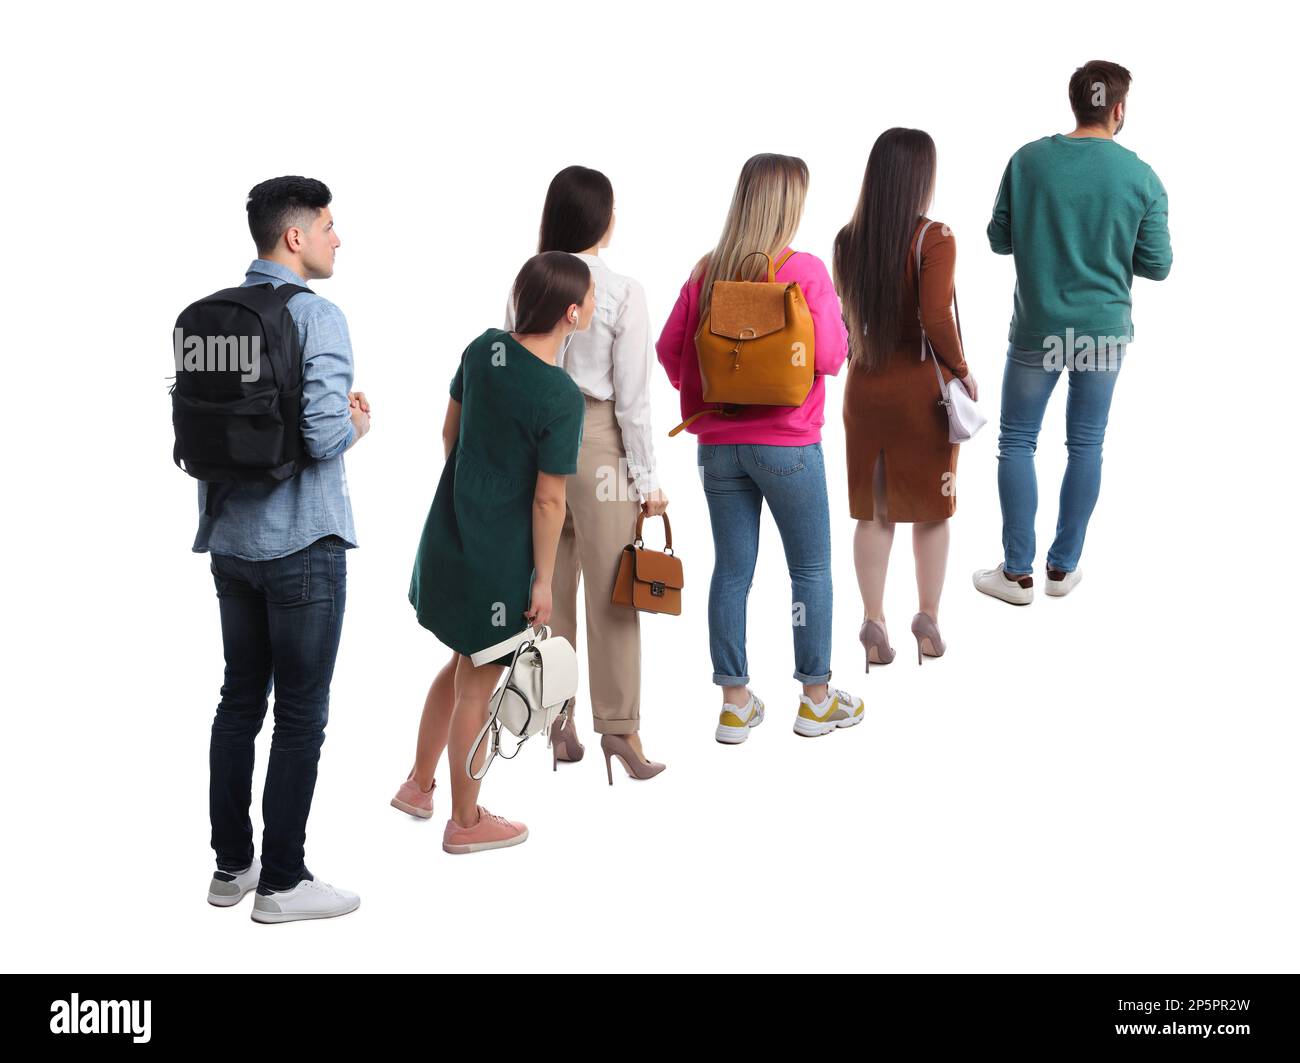 People waiting in queue on white background, back view Stock Photo